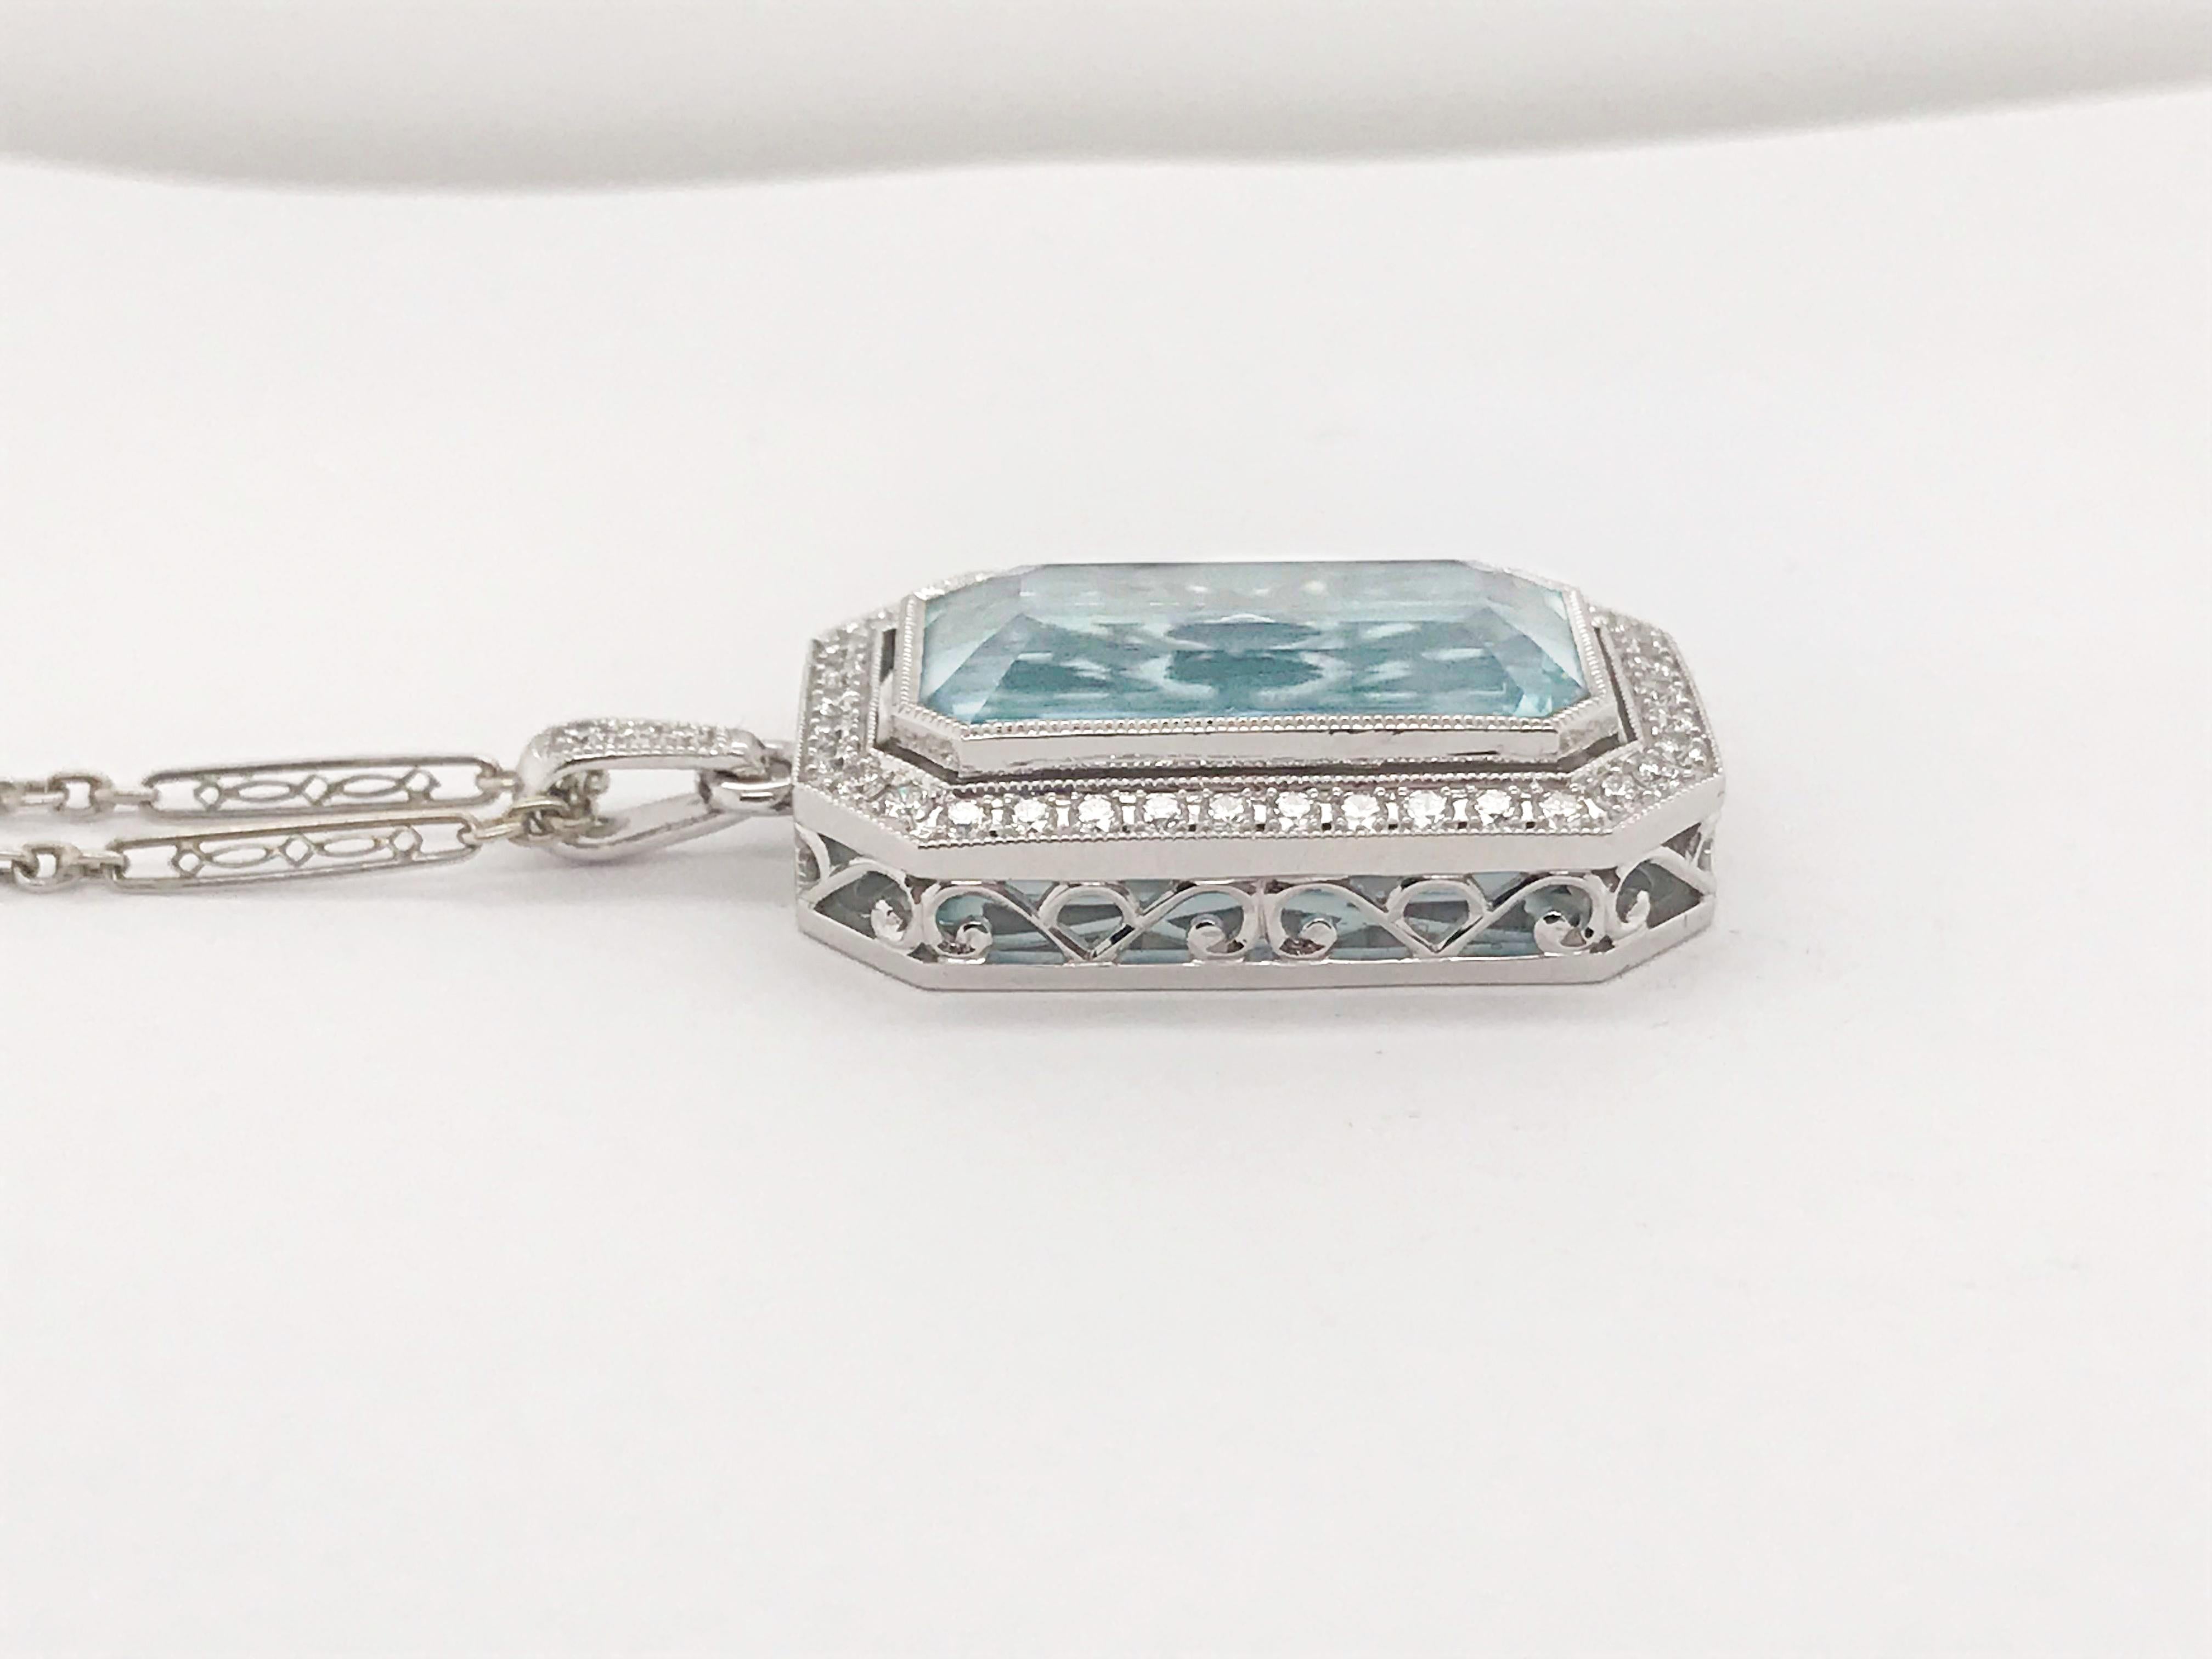 This Aquamarine is stunning in both it's 14.86-carat size and light blue color. The Aquamarine is displayed in a custom pendant made of 14K white gold and featuring 41 round brilliant cut diamonds totaling .81 carats. This pendant is sold on an